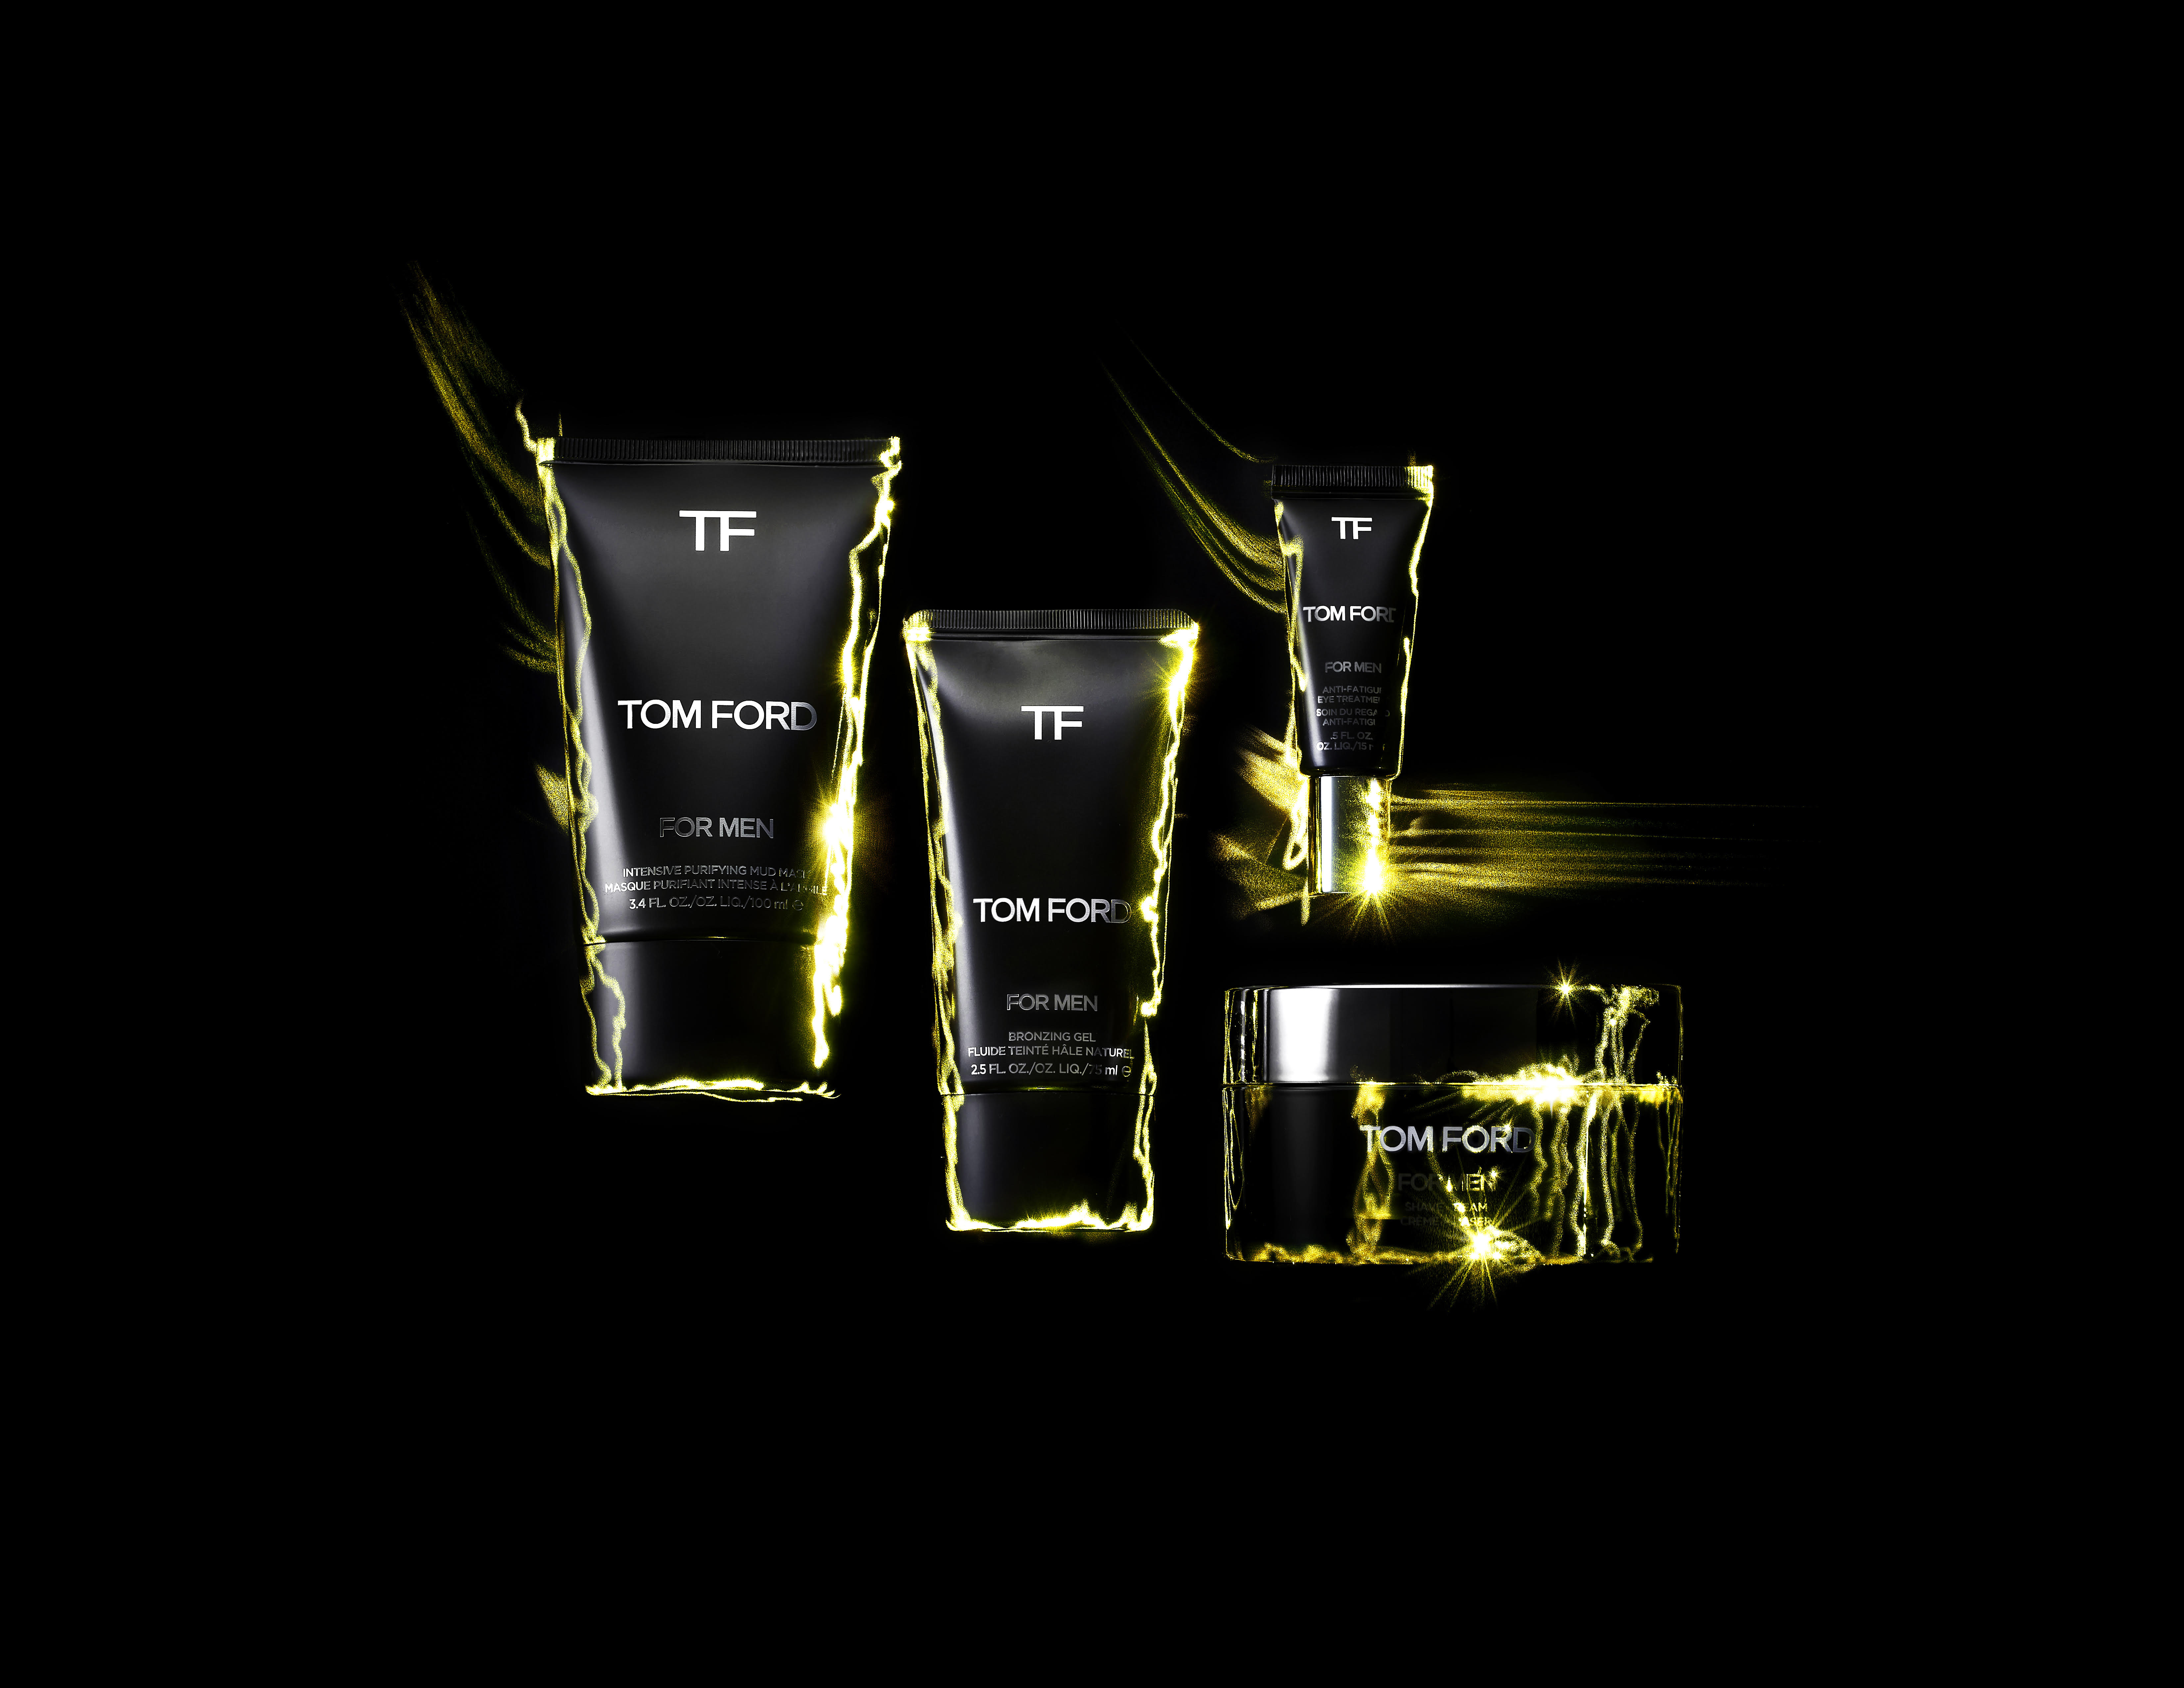 TomFordEditorial - skincare-grooming, grooming, gift - Elevate His Skincare Routine - Tom Ford, Shave Cream, Mask, Eye Treatment, Bronzer, Beauty - Elevate His Skincare Routine